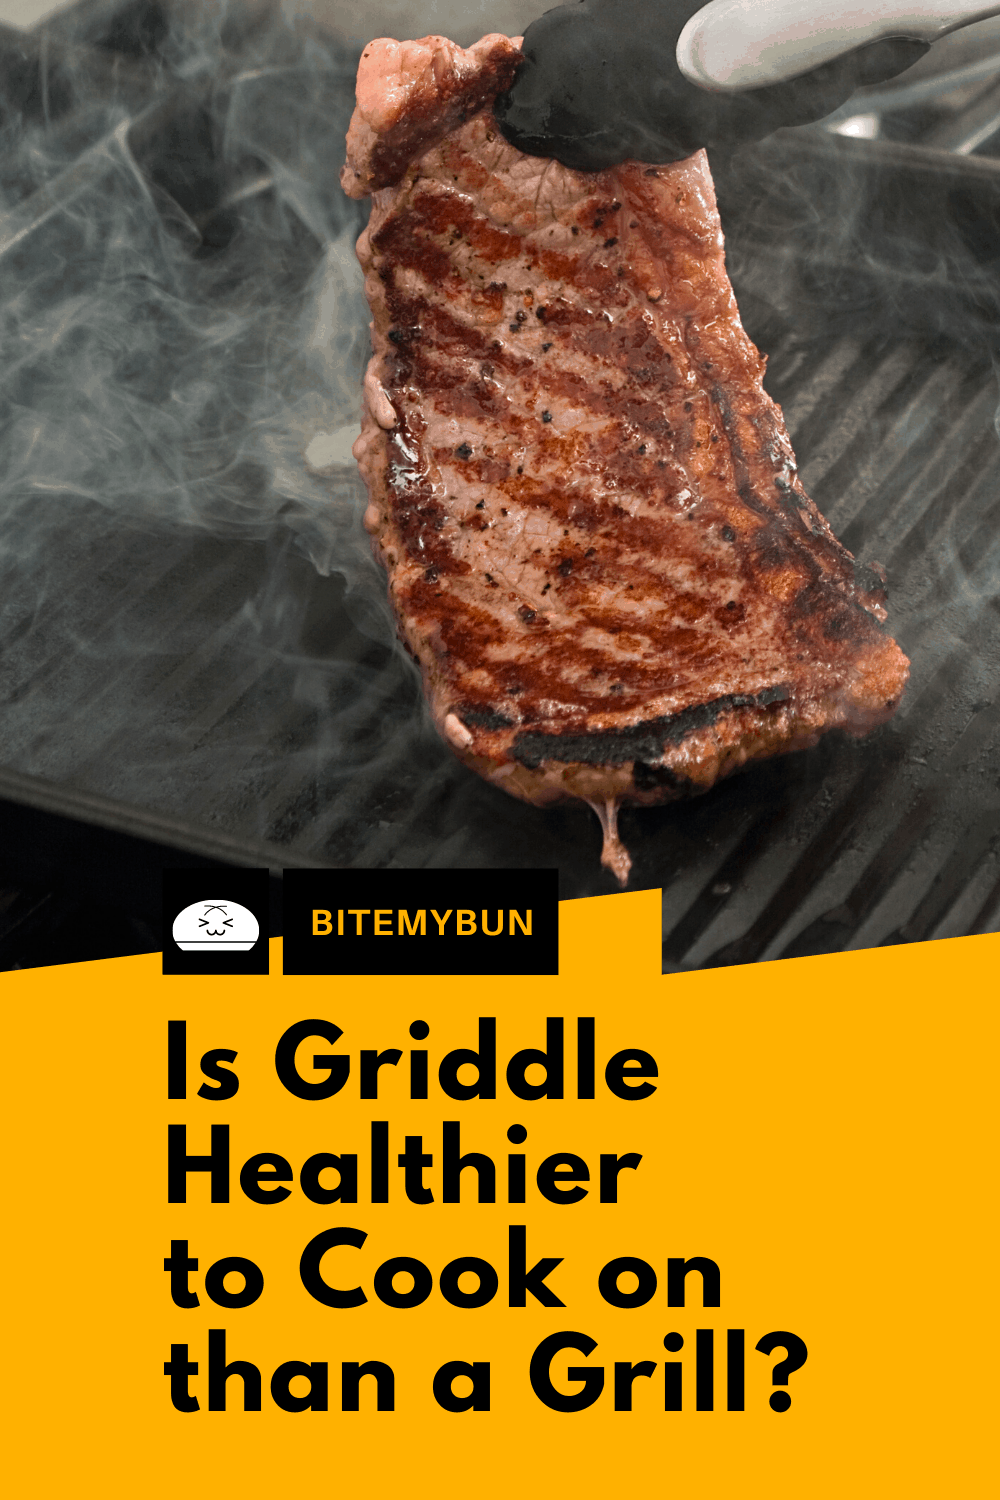 Is griddle healthier  than cooking a grill?